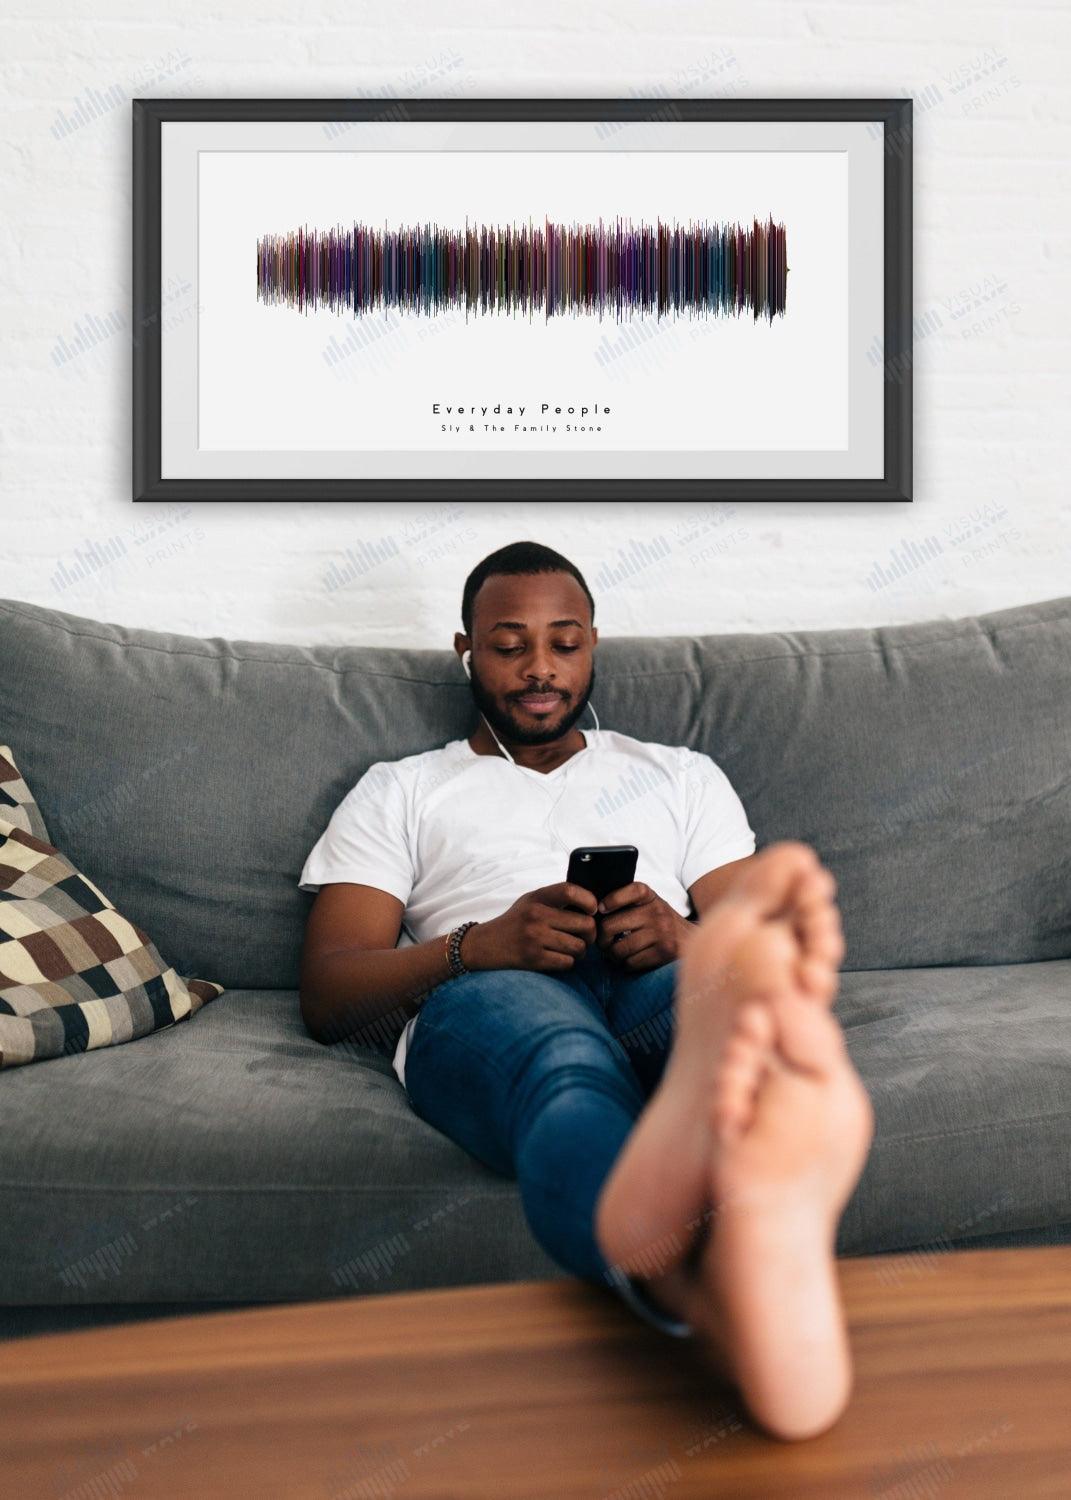 Everyday People by Sly & The Family Stone - Visual Wave Prints